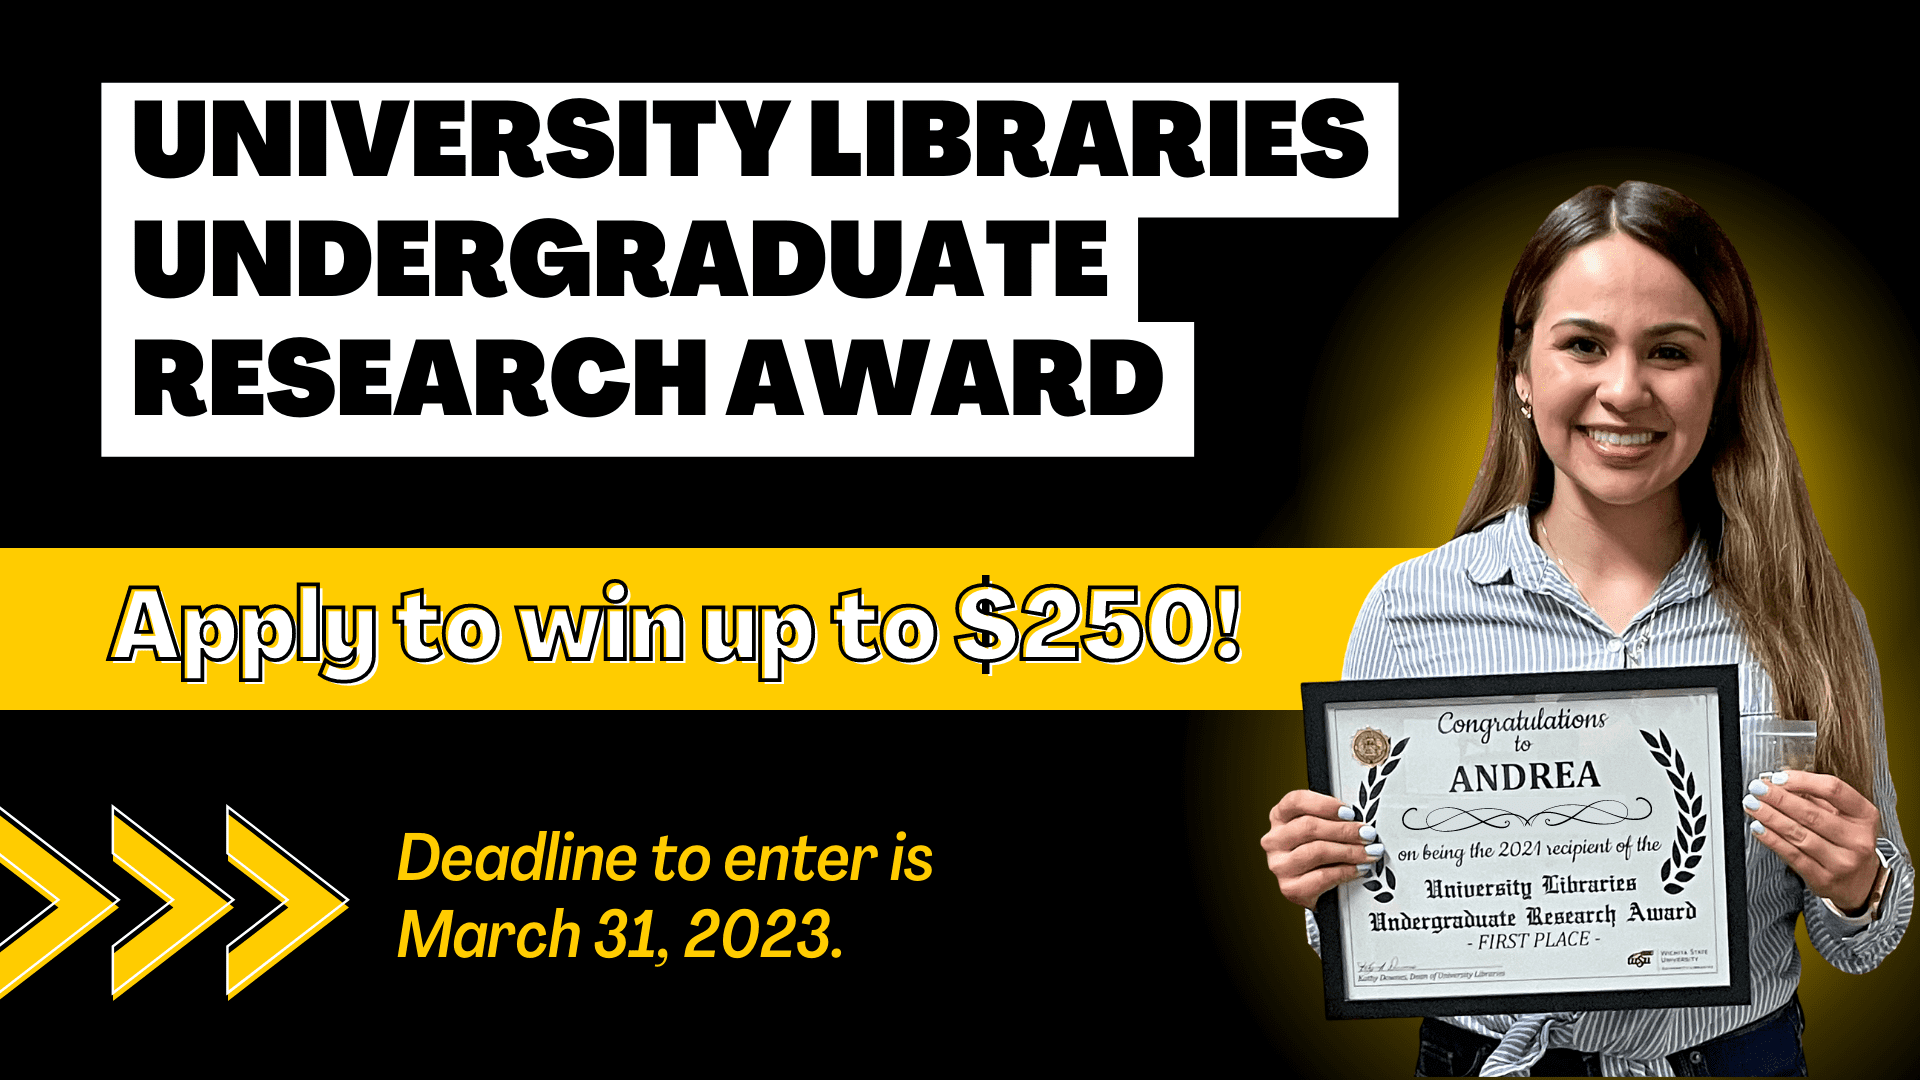 Photo of a student holding the award with the text, "University Libraries Undergraduate Research Award Apply to win up to $250! Deadline to enter is March 31, 2023."